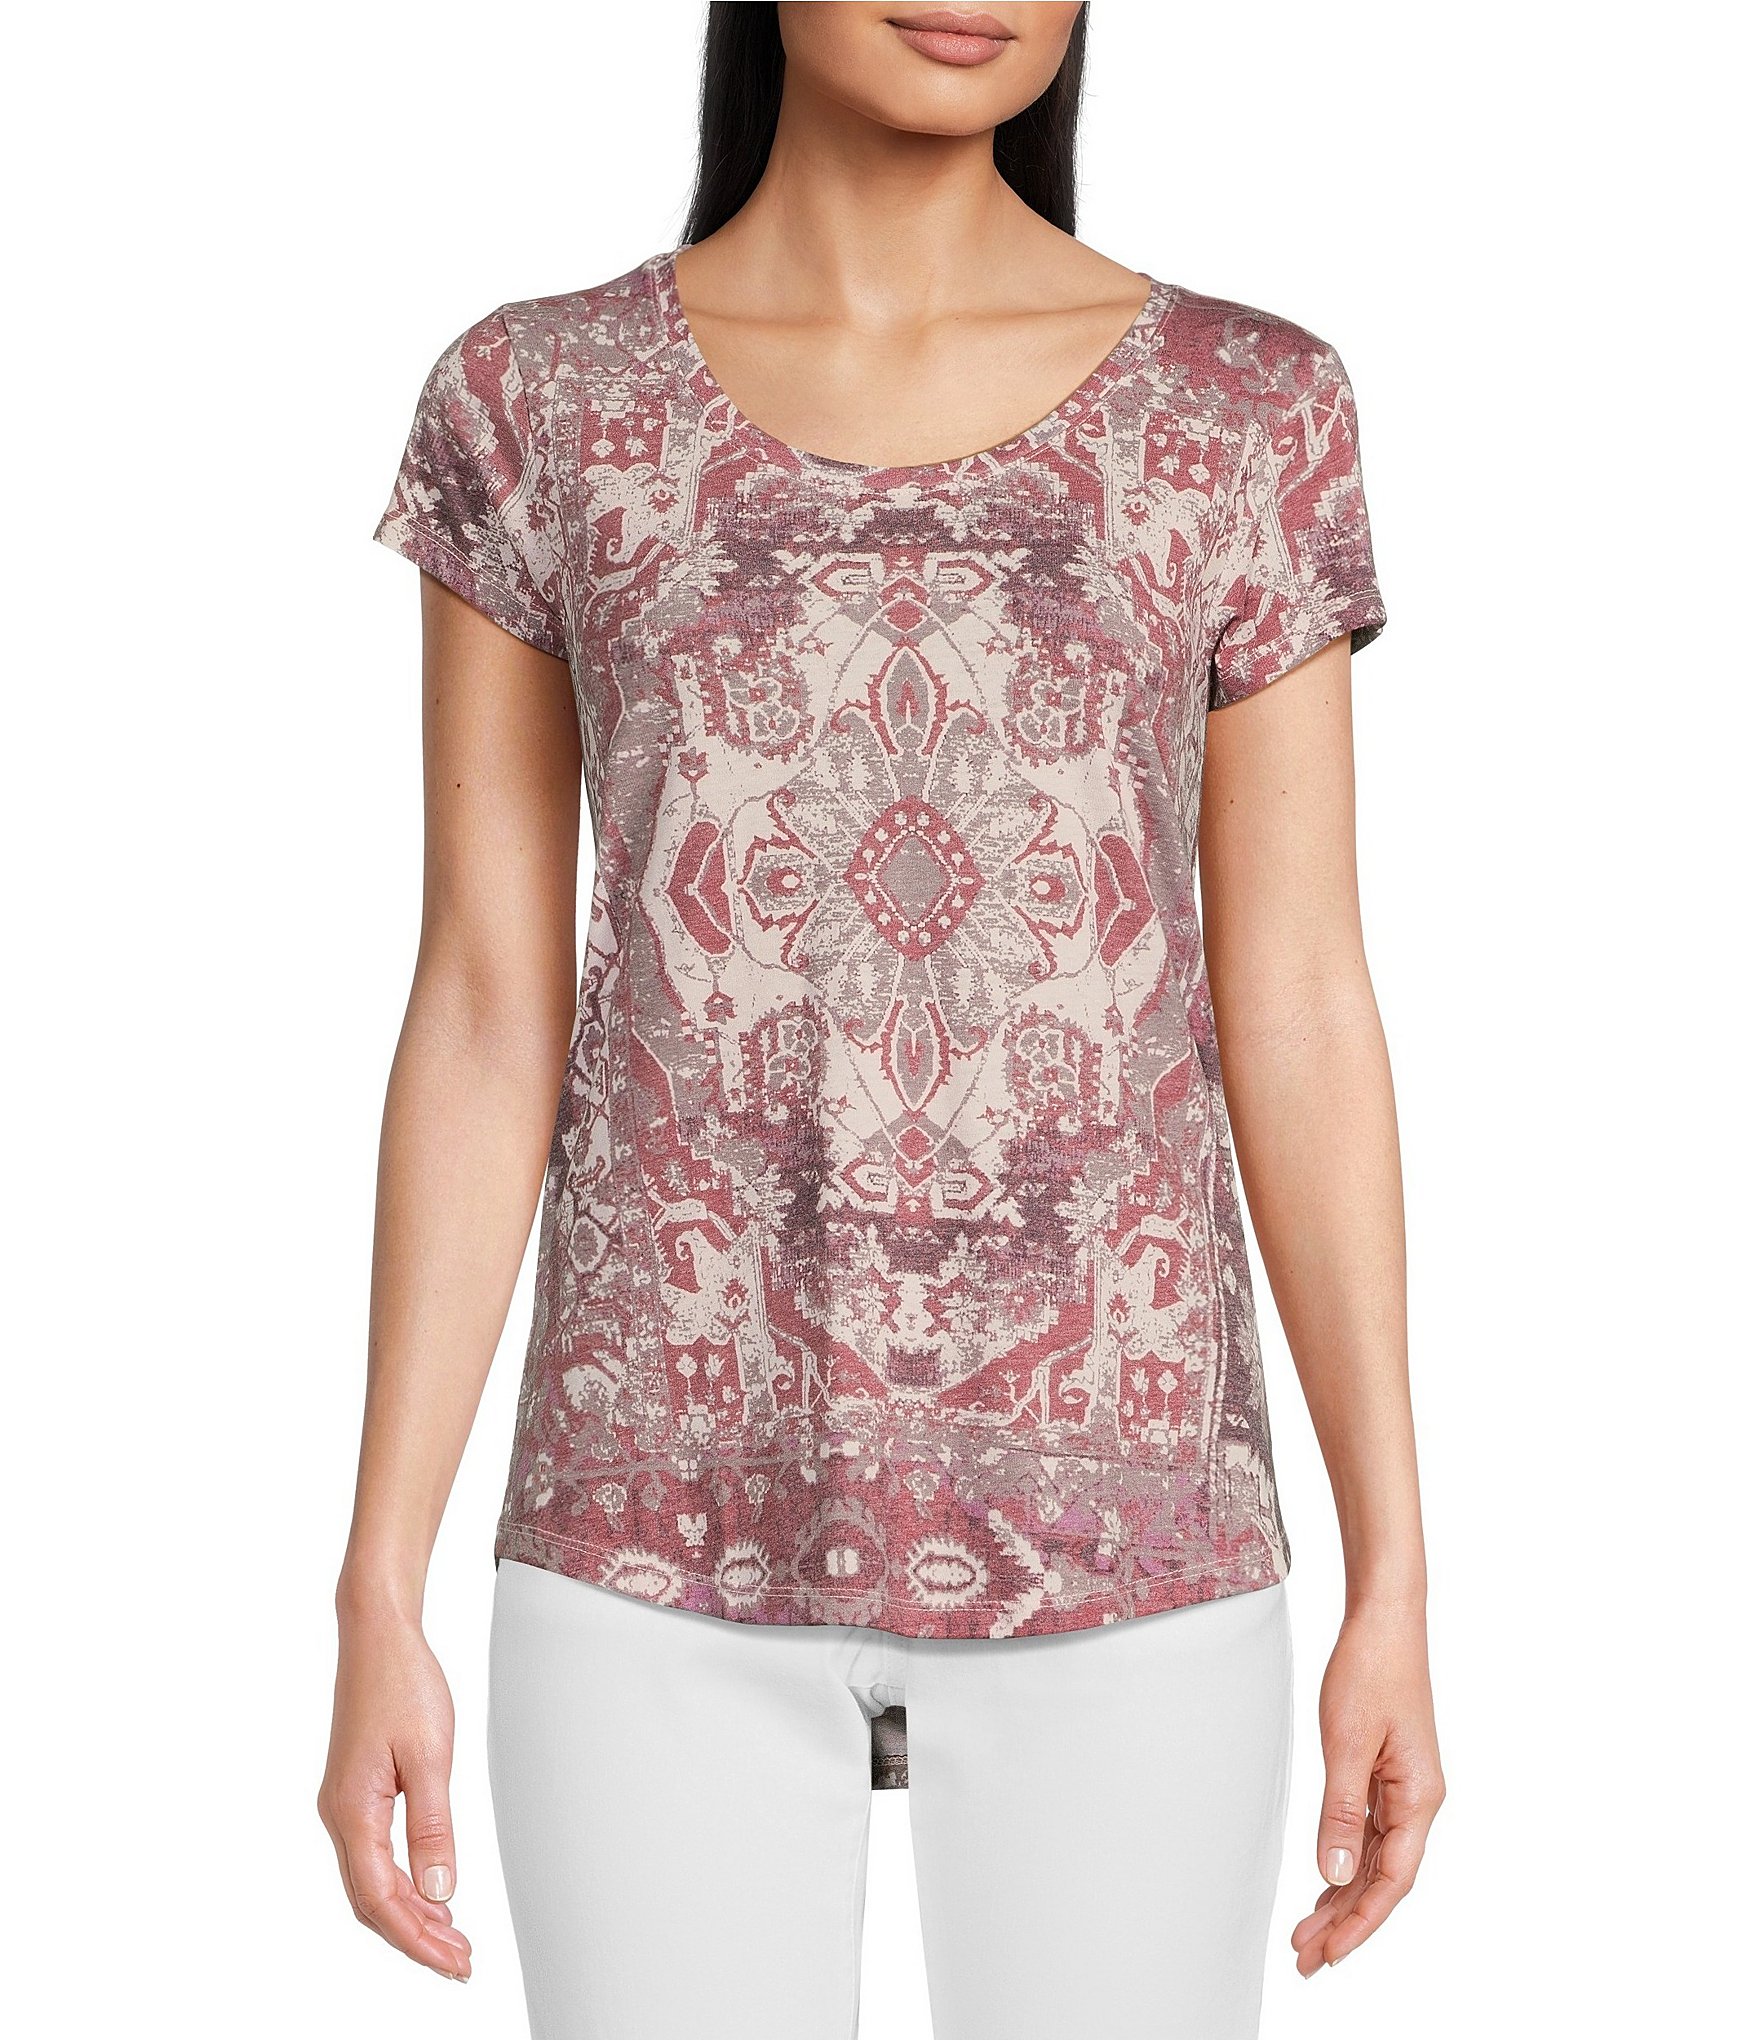 Lucky Brand Tapestry Print Scoop Neck Short Sleeve Relax Knit Tee Shirt